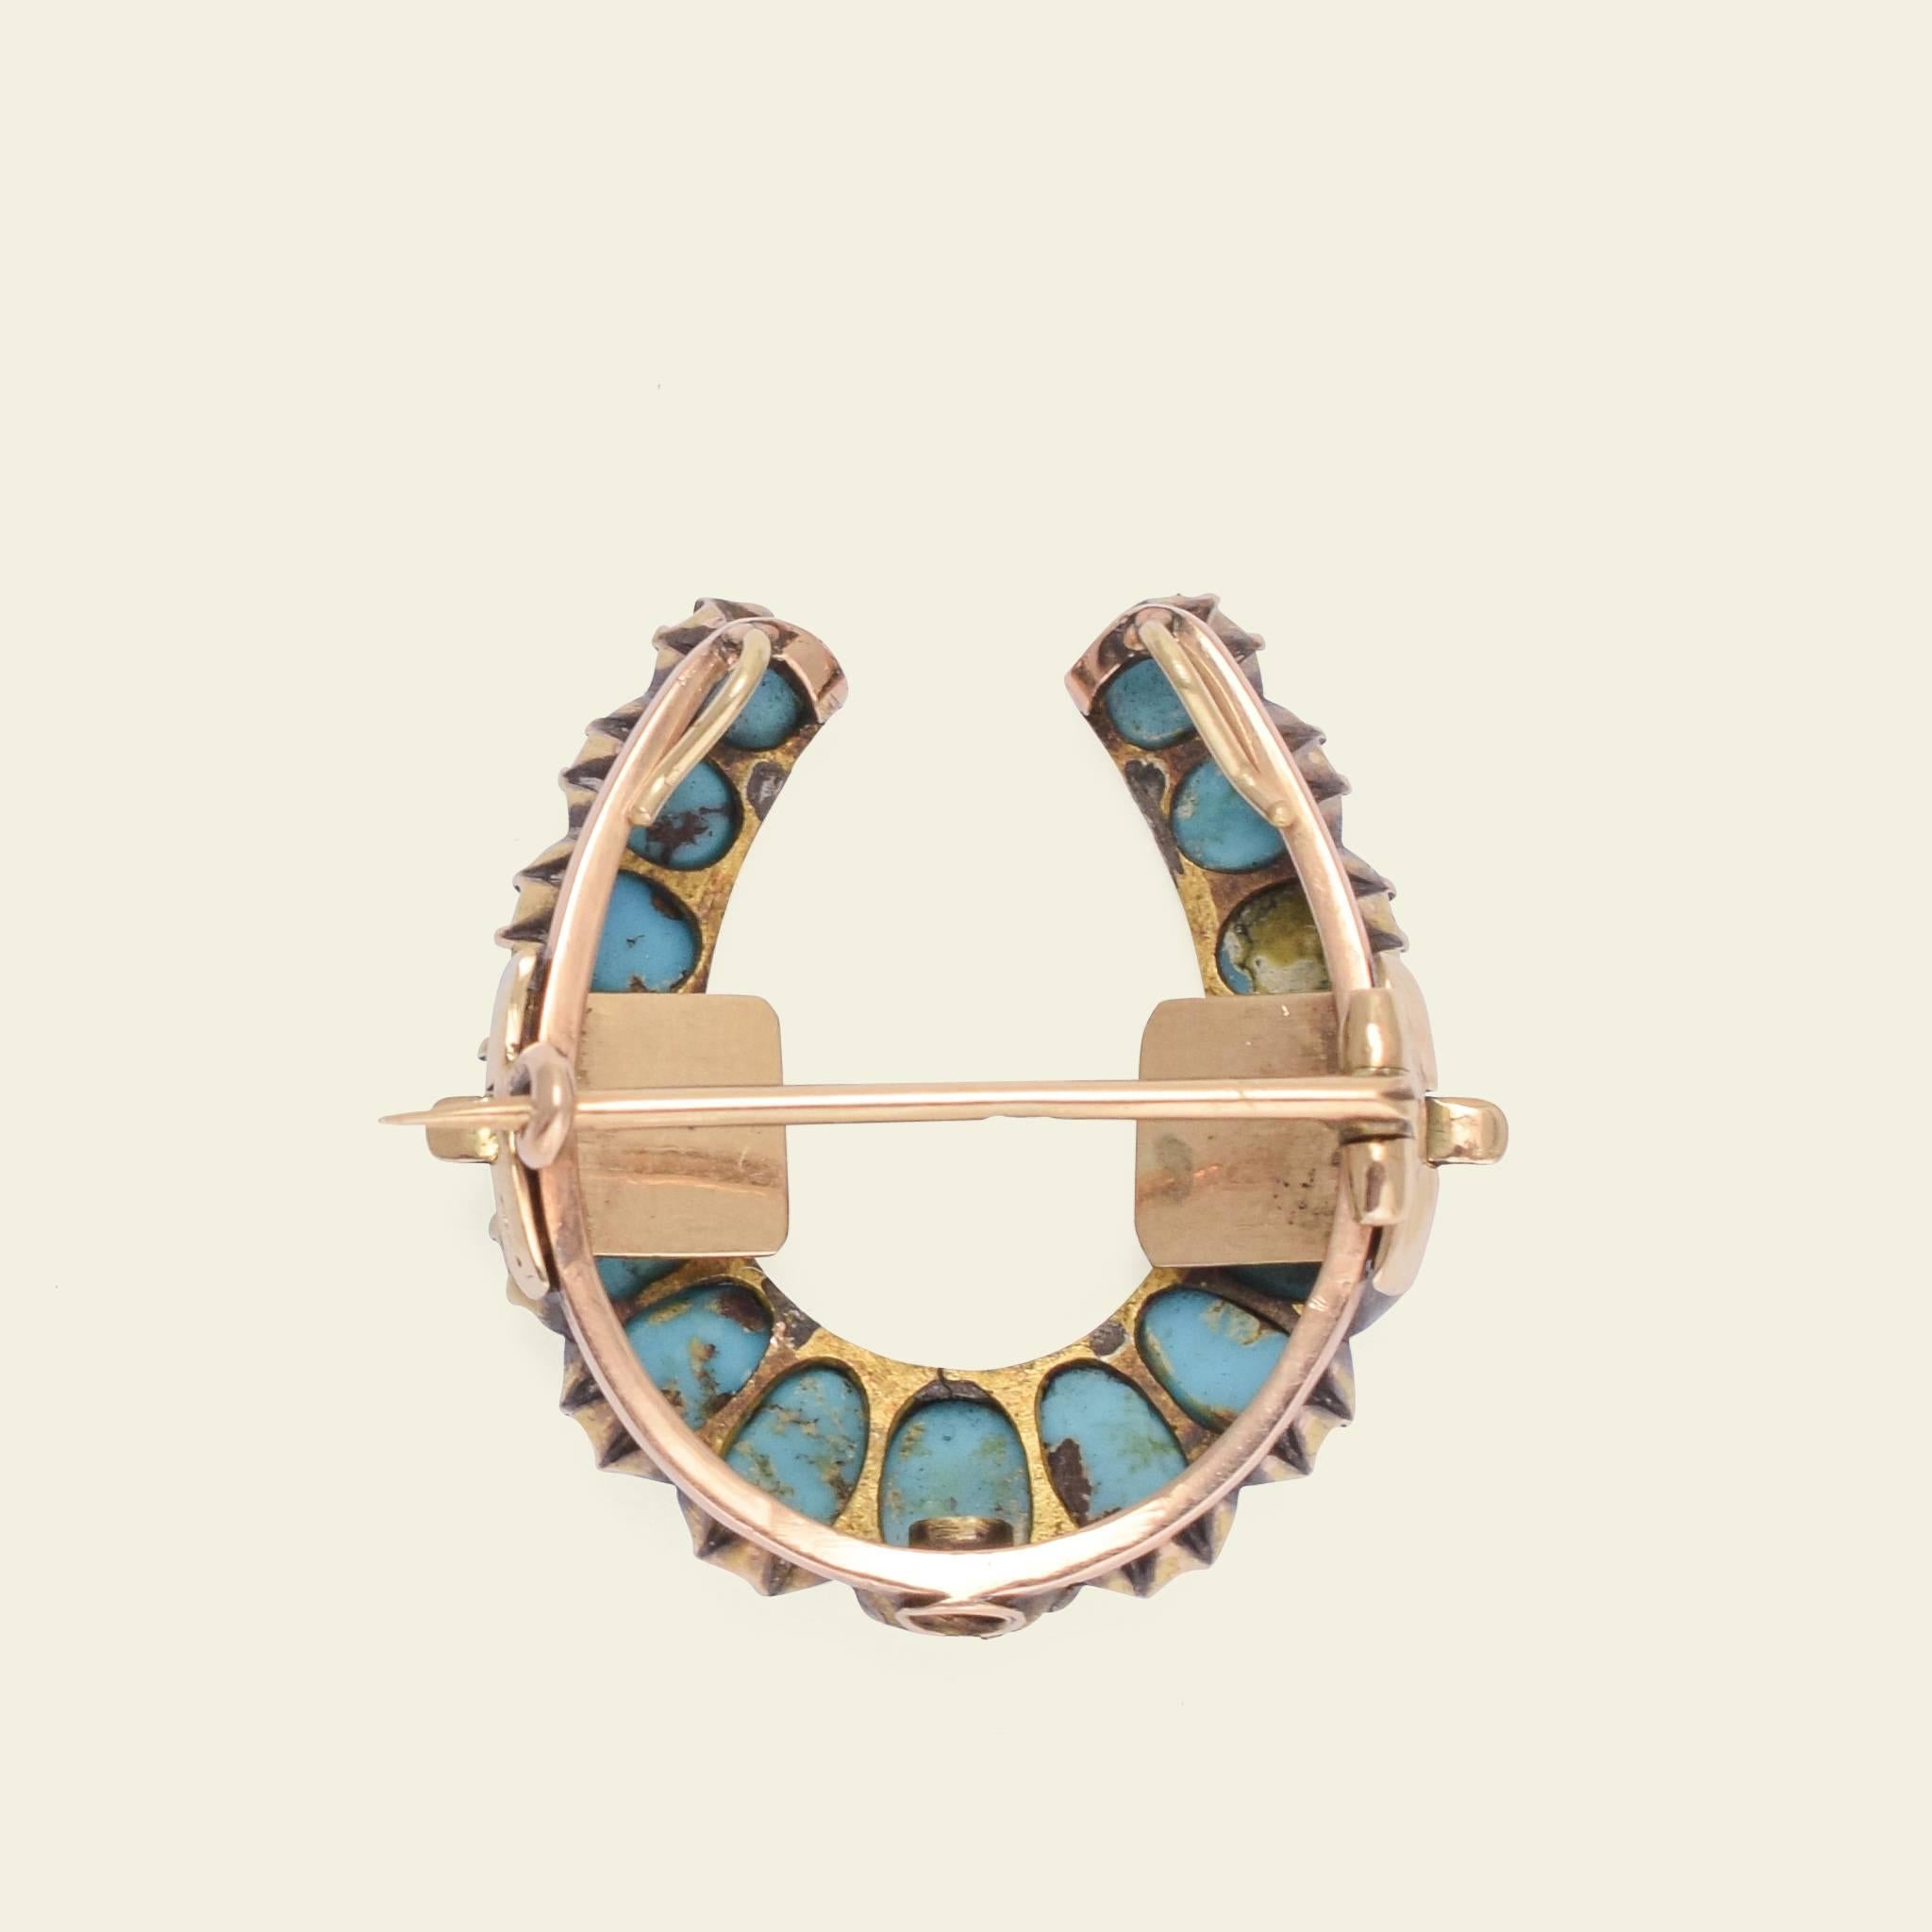 This ingenious piece of Victorian jewelry fashioned in the shape of a horseshoe is not just a brooch, but a brooch that seamlessly converts into a pendant. The lovely robin's egg blue turquoise cabochons that form the face of are mounted on a body